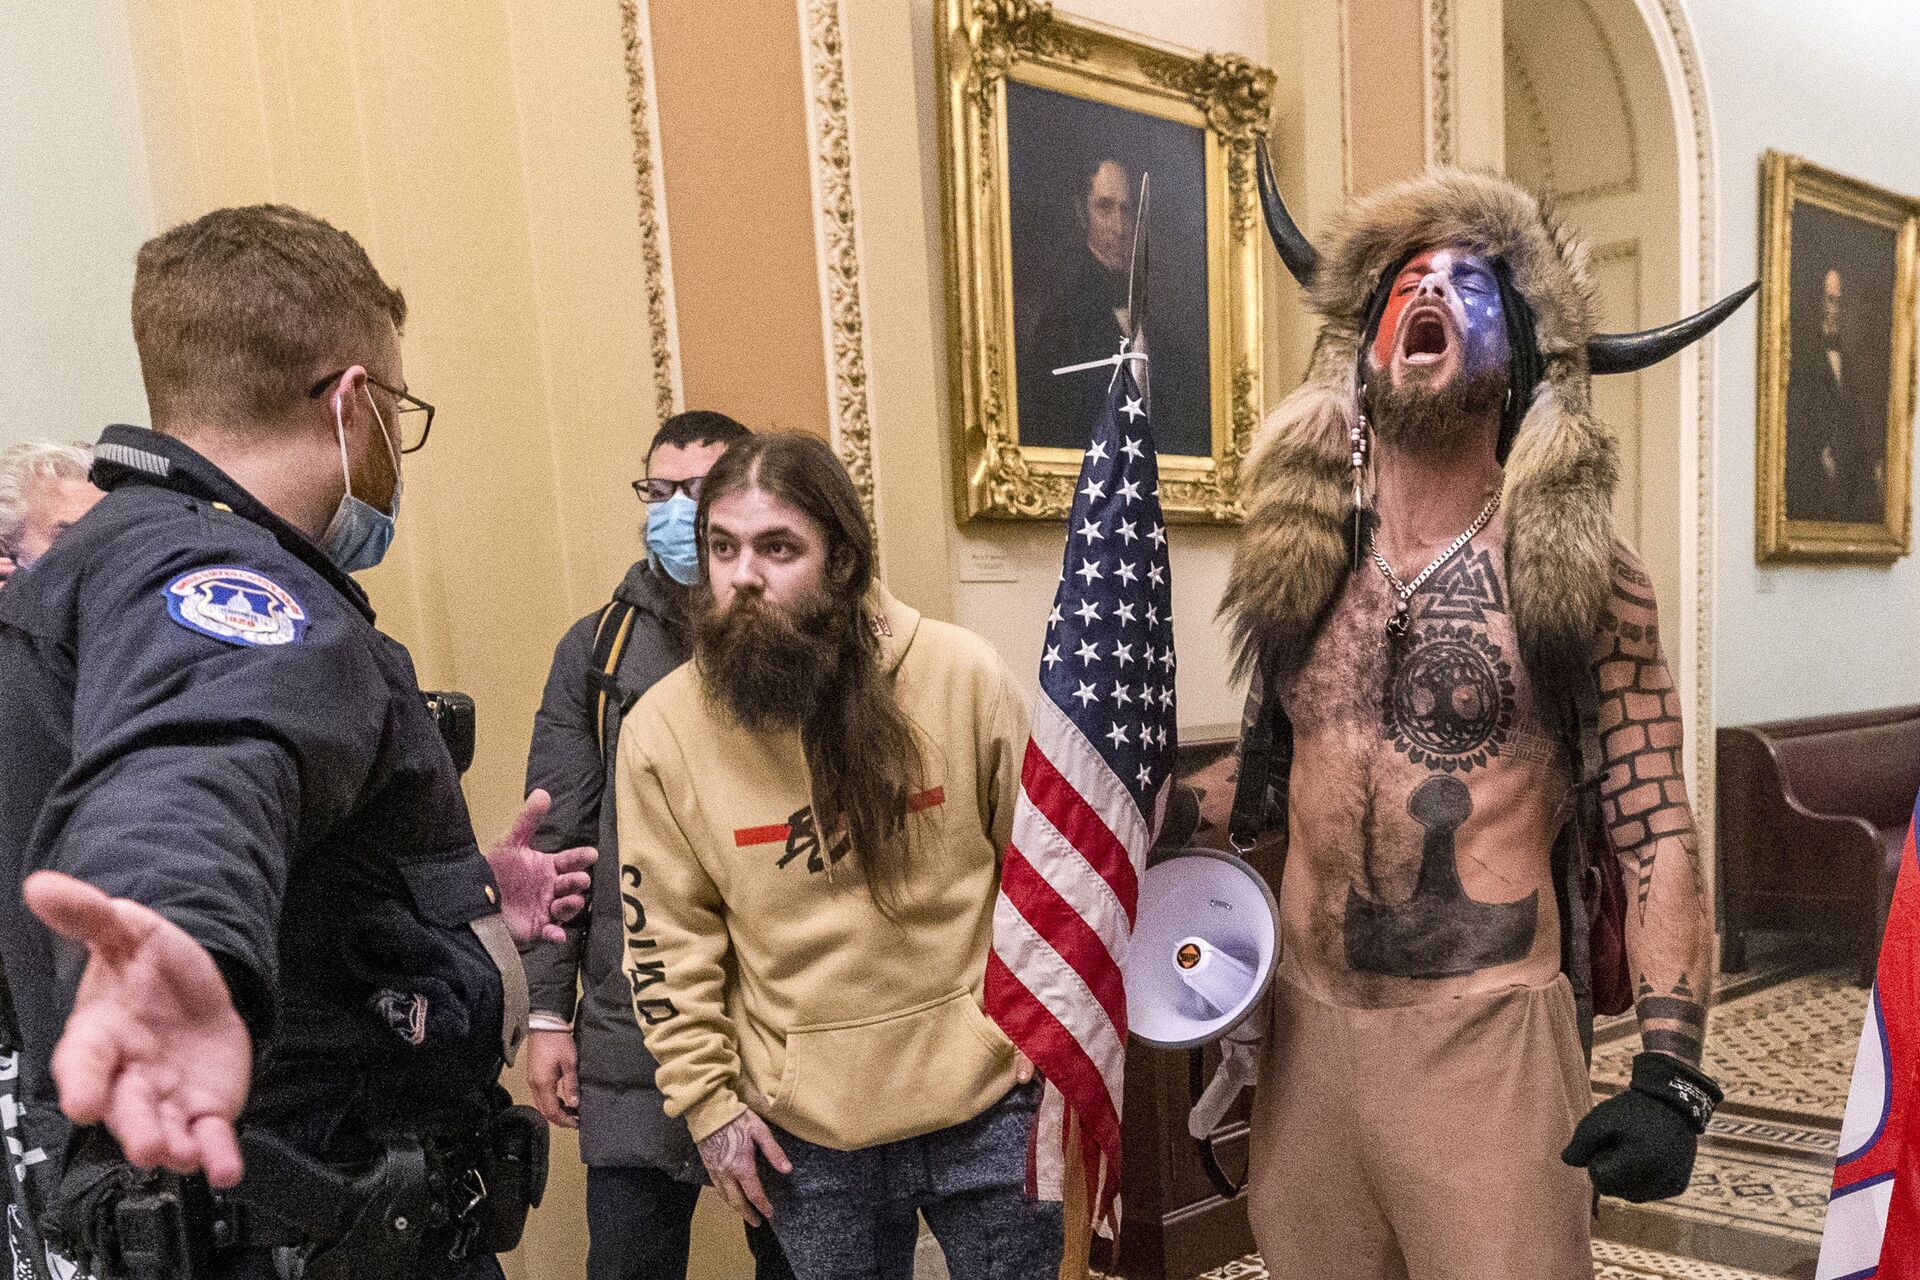 FILE - In this Wednesday, Jan. 6, 2021 file photo, supporters of President Donald Trump, including Jacob Chansley, right with fur hat, are confronted by U.S. Capitol Police officers outside the Senate Chamber inside the Capitol in Washington. Congress is set to hear from former security officials about what went wrong at the U.S. Capitol on Jan. 6. That's when when a violent mob laid siege to the Capitol and interrupted the counting of electoral votes. Three of the four testifying Tuesday resigned under pressure immediately after the attack, including the former head of the Capitol Police.  - Sputnik International, 1920, 02.05.2022